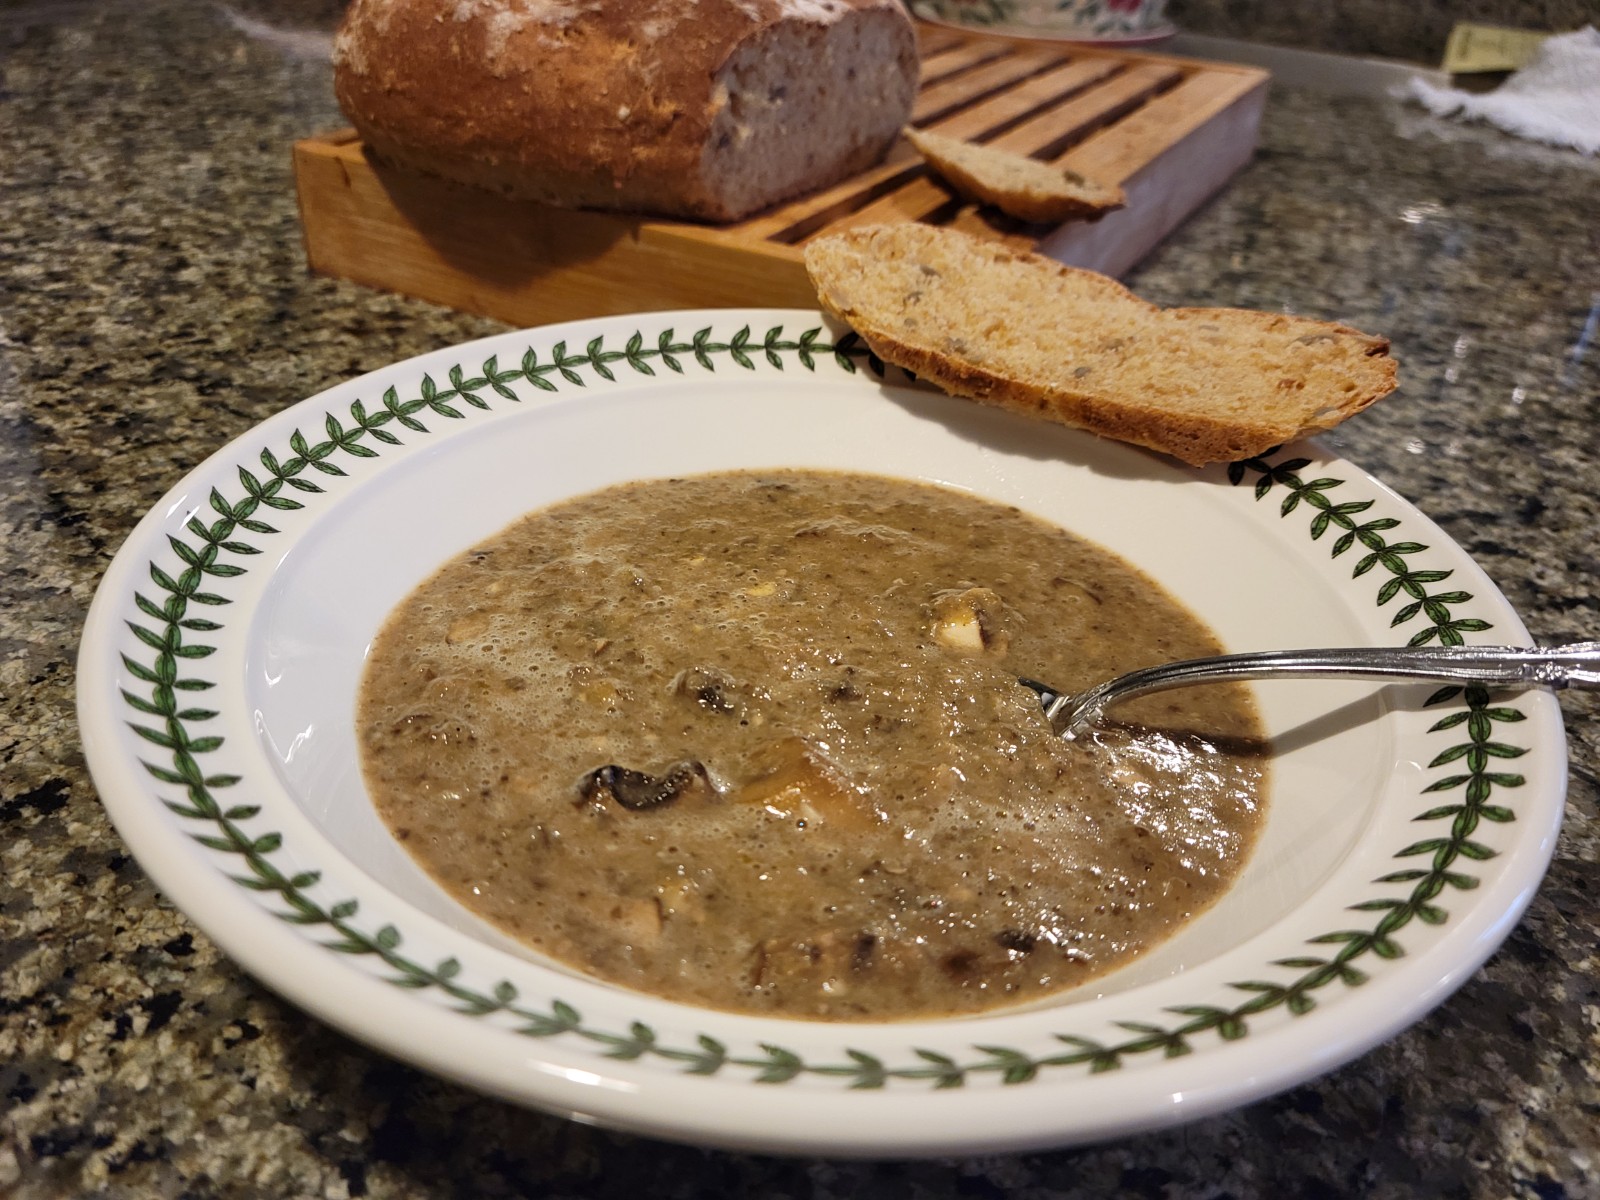 Image: Mushroom soup with bread